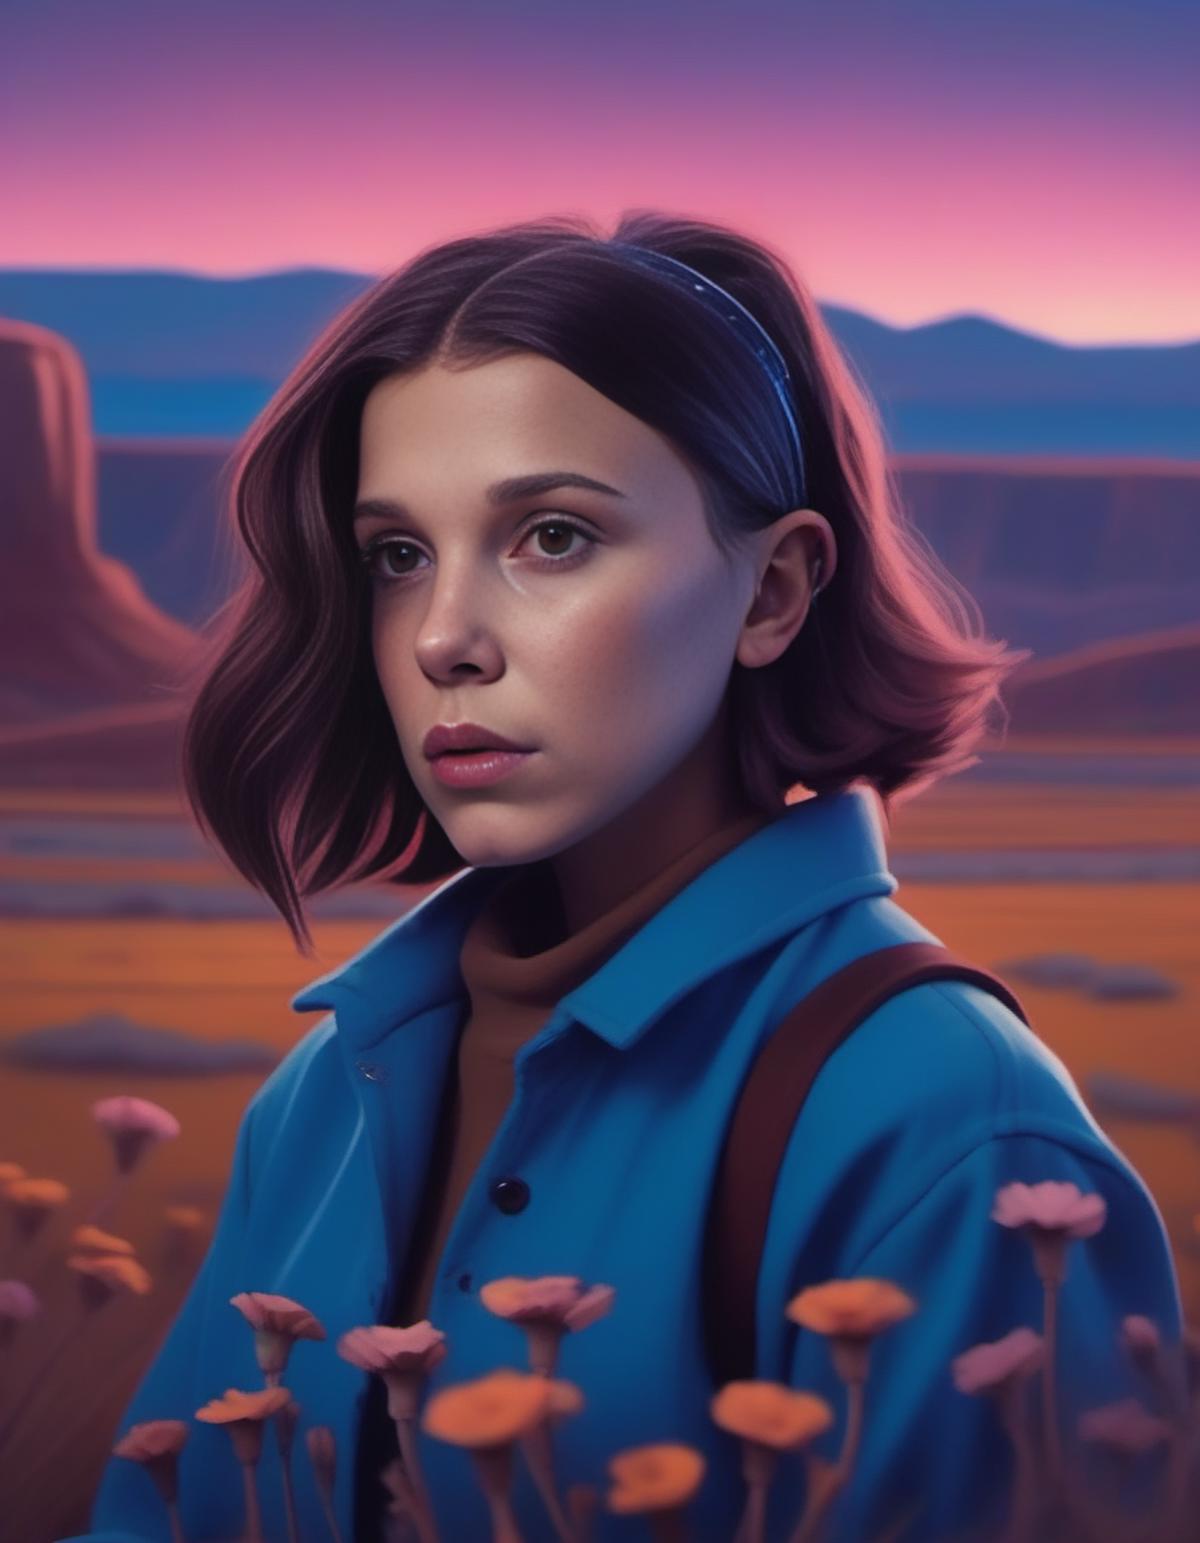 Millie Bobby Brown image by parar20